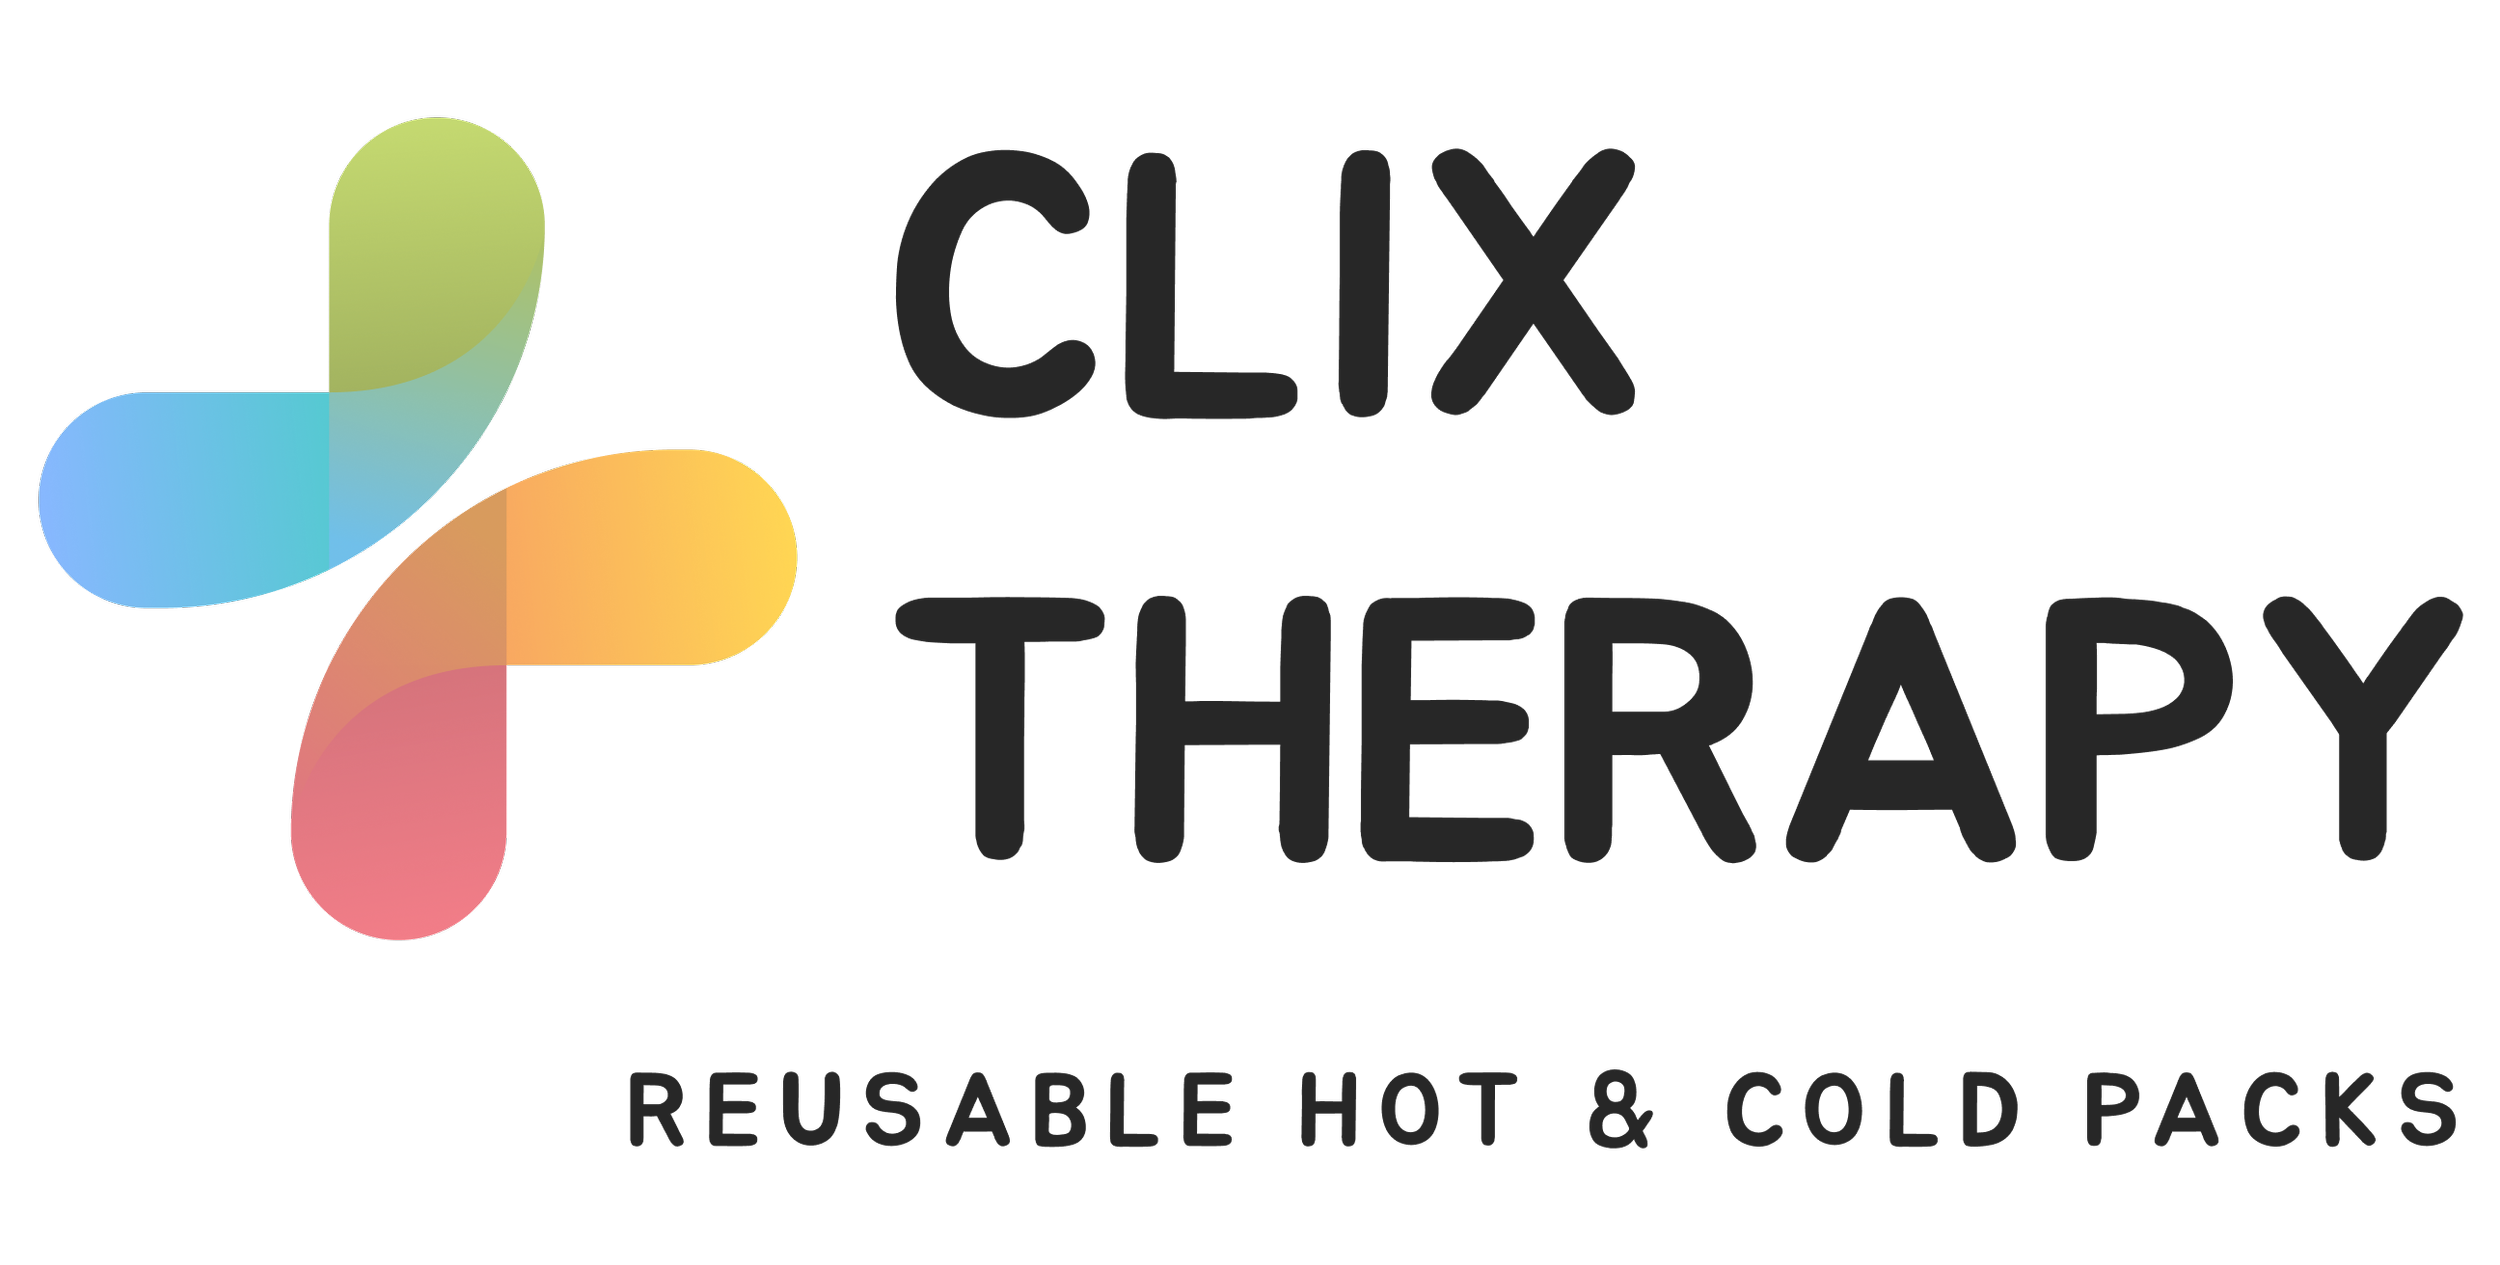 Clix Therapy Logo.png